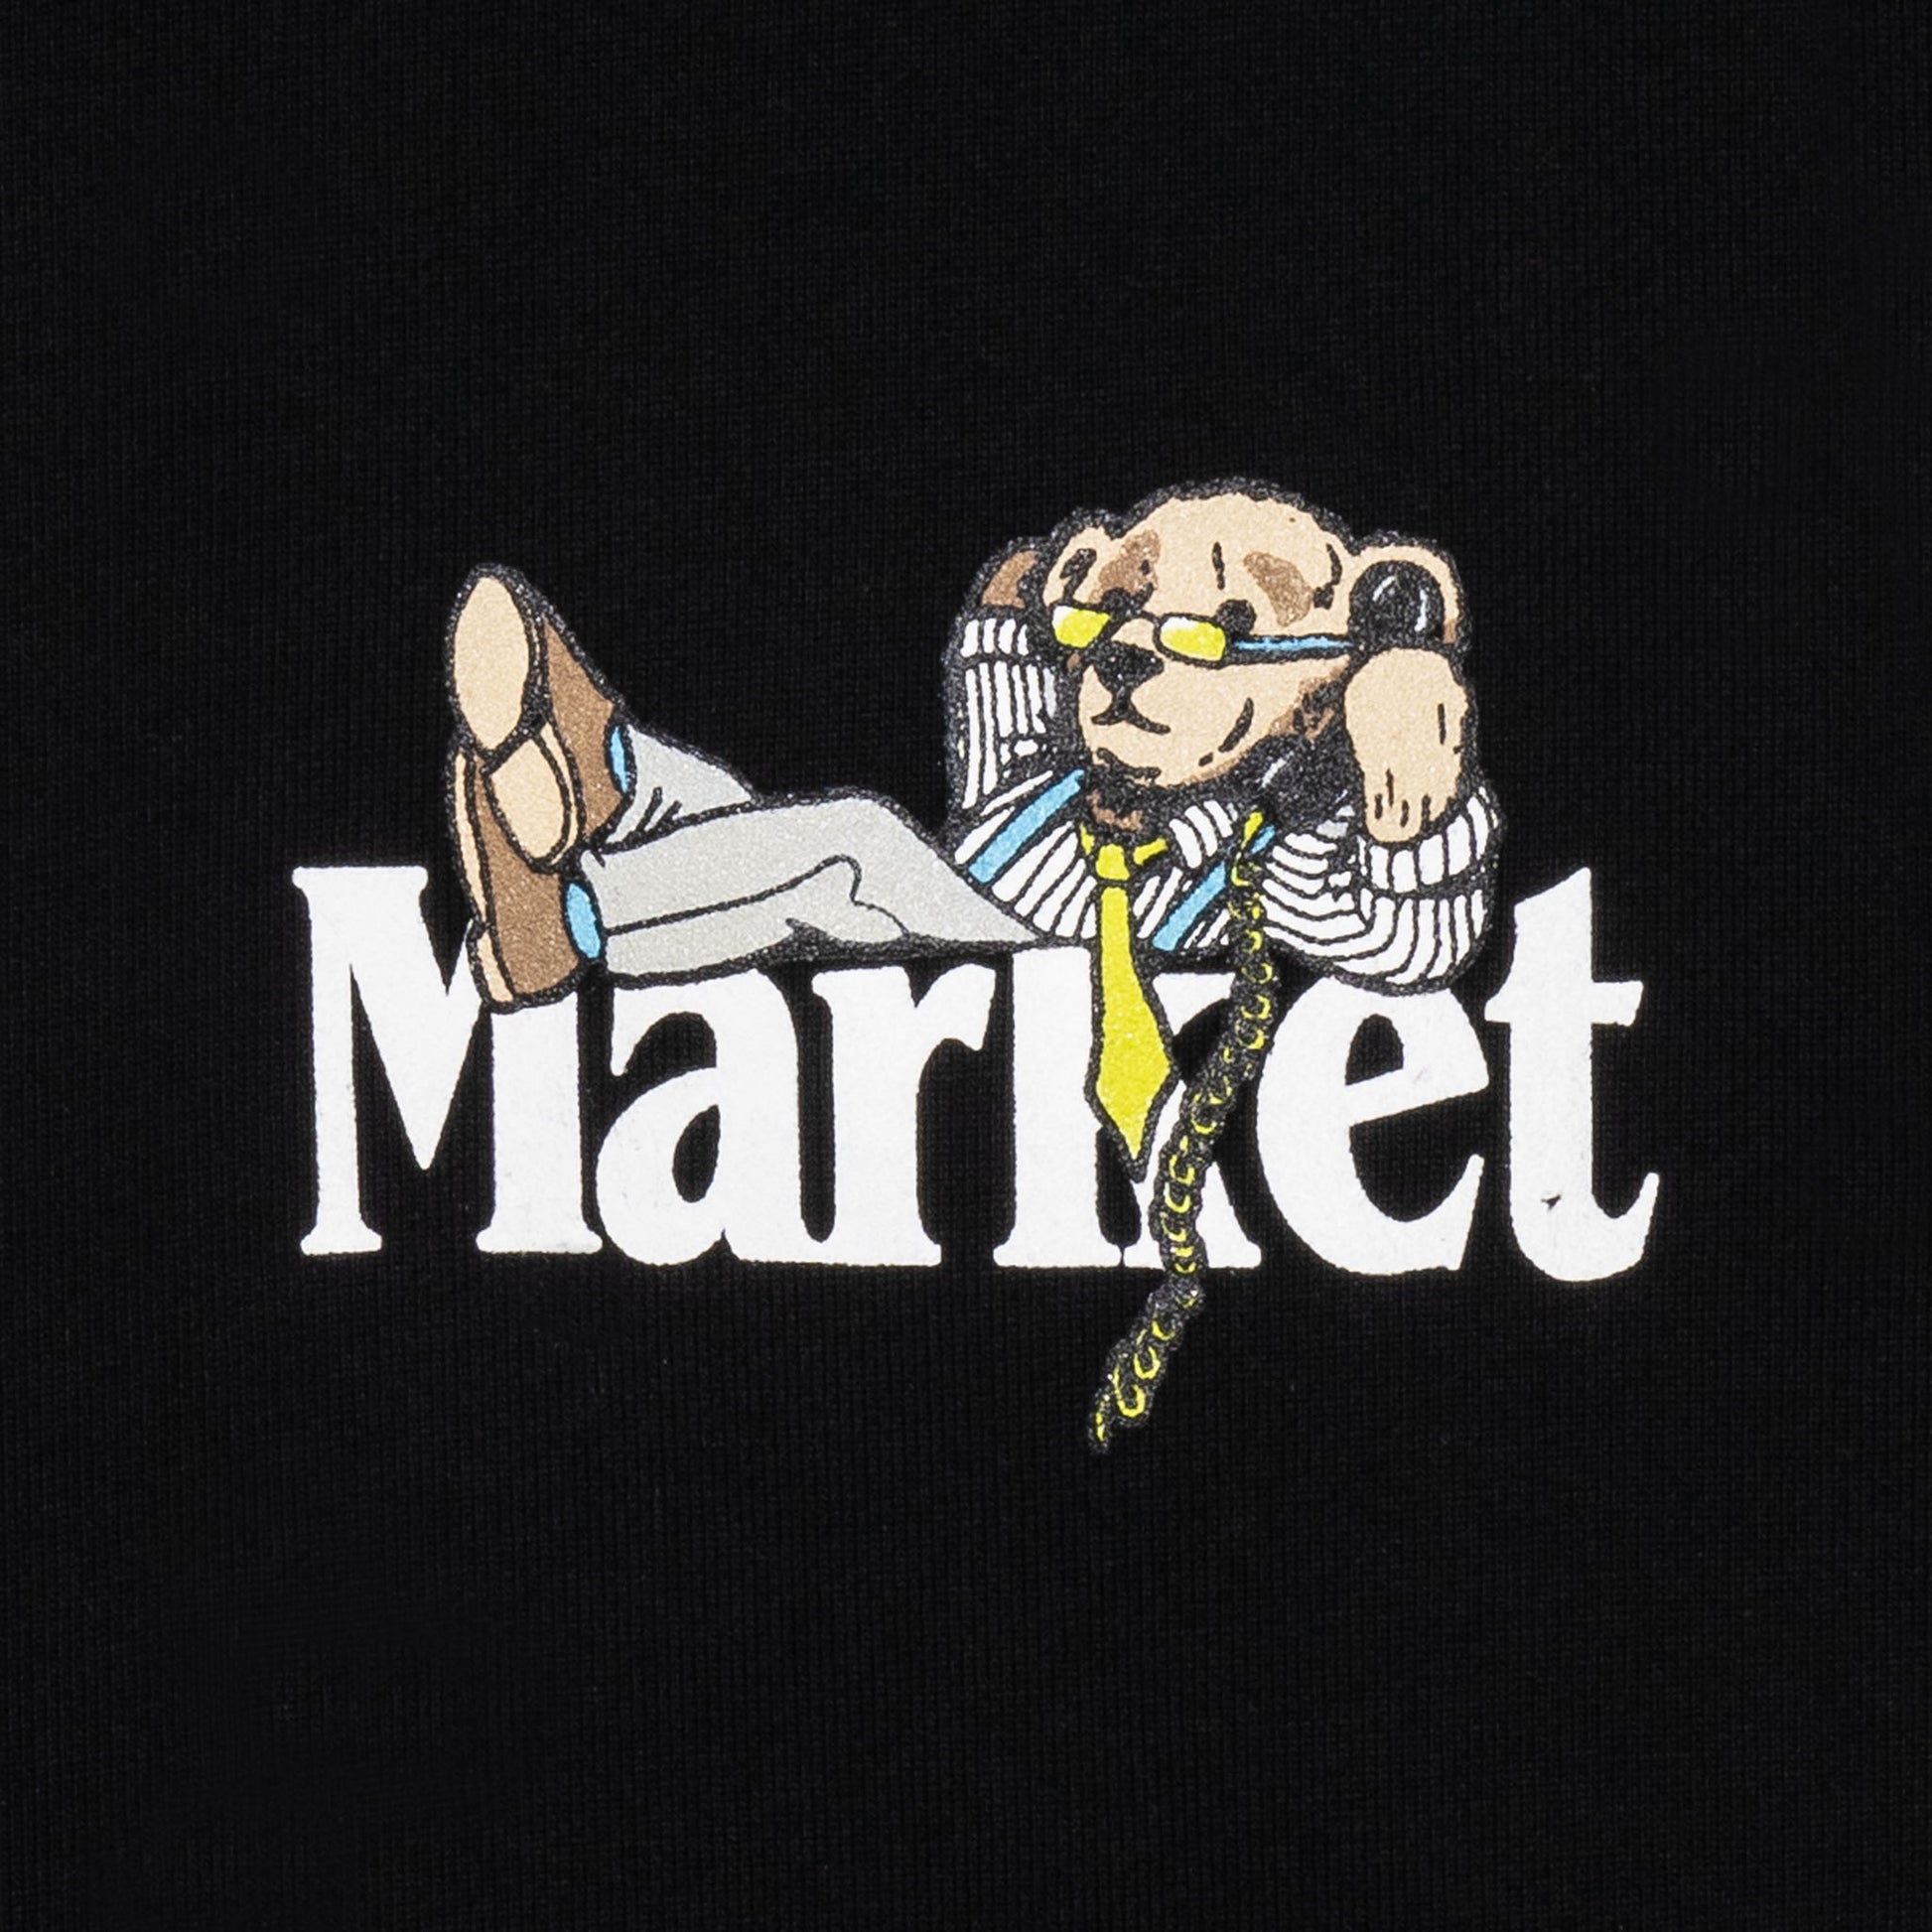 MARKET clothing brand BETTER CALL BEAR HOODIE. Find more graphic tees, hats and more at MarketStudios.com. Formally Chinatown Market.